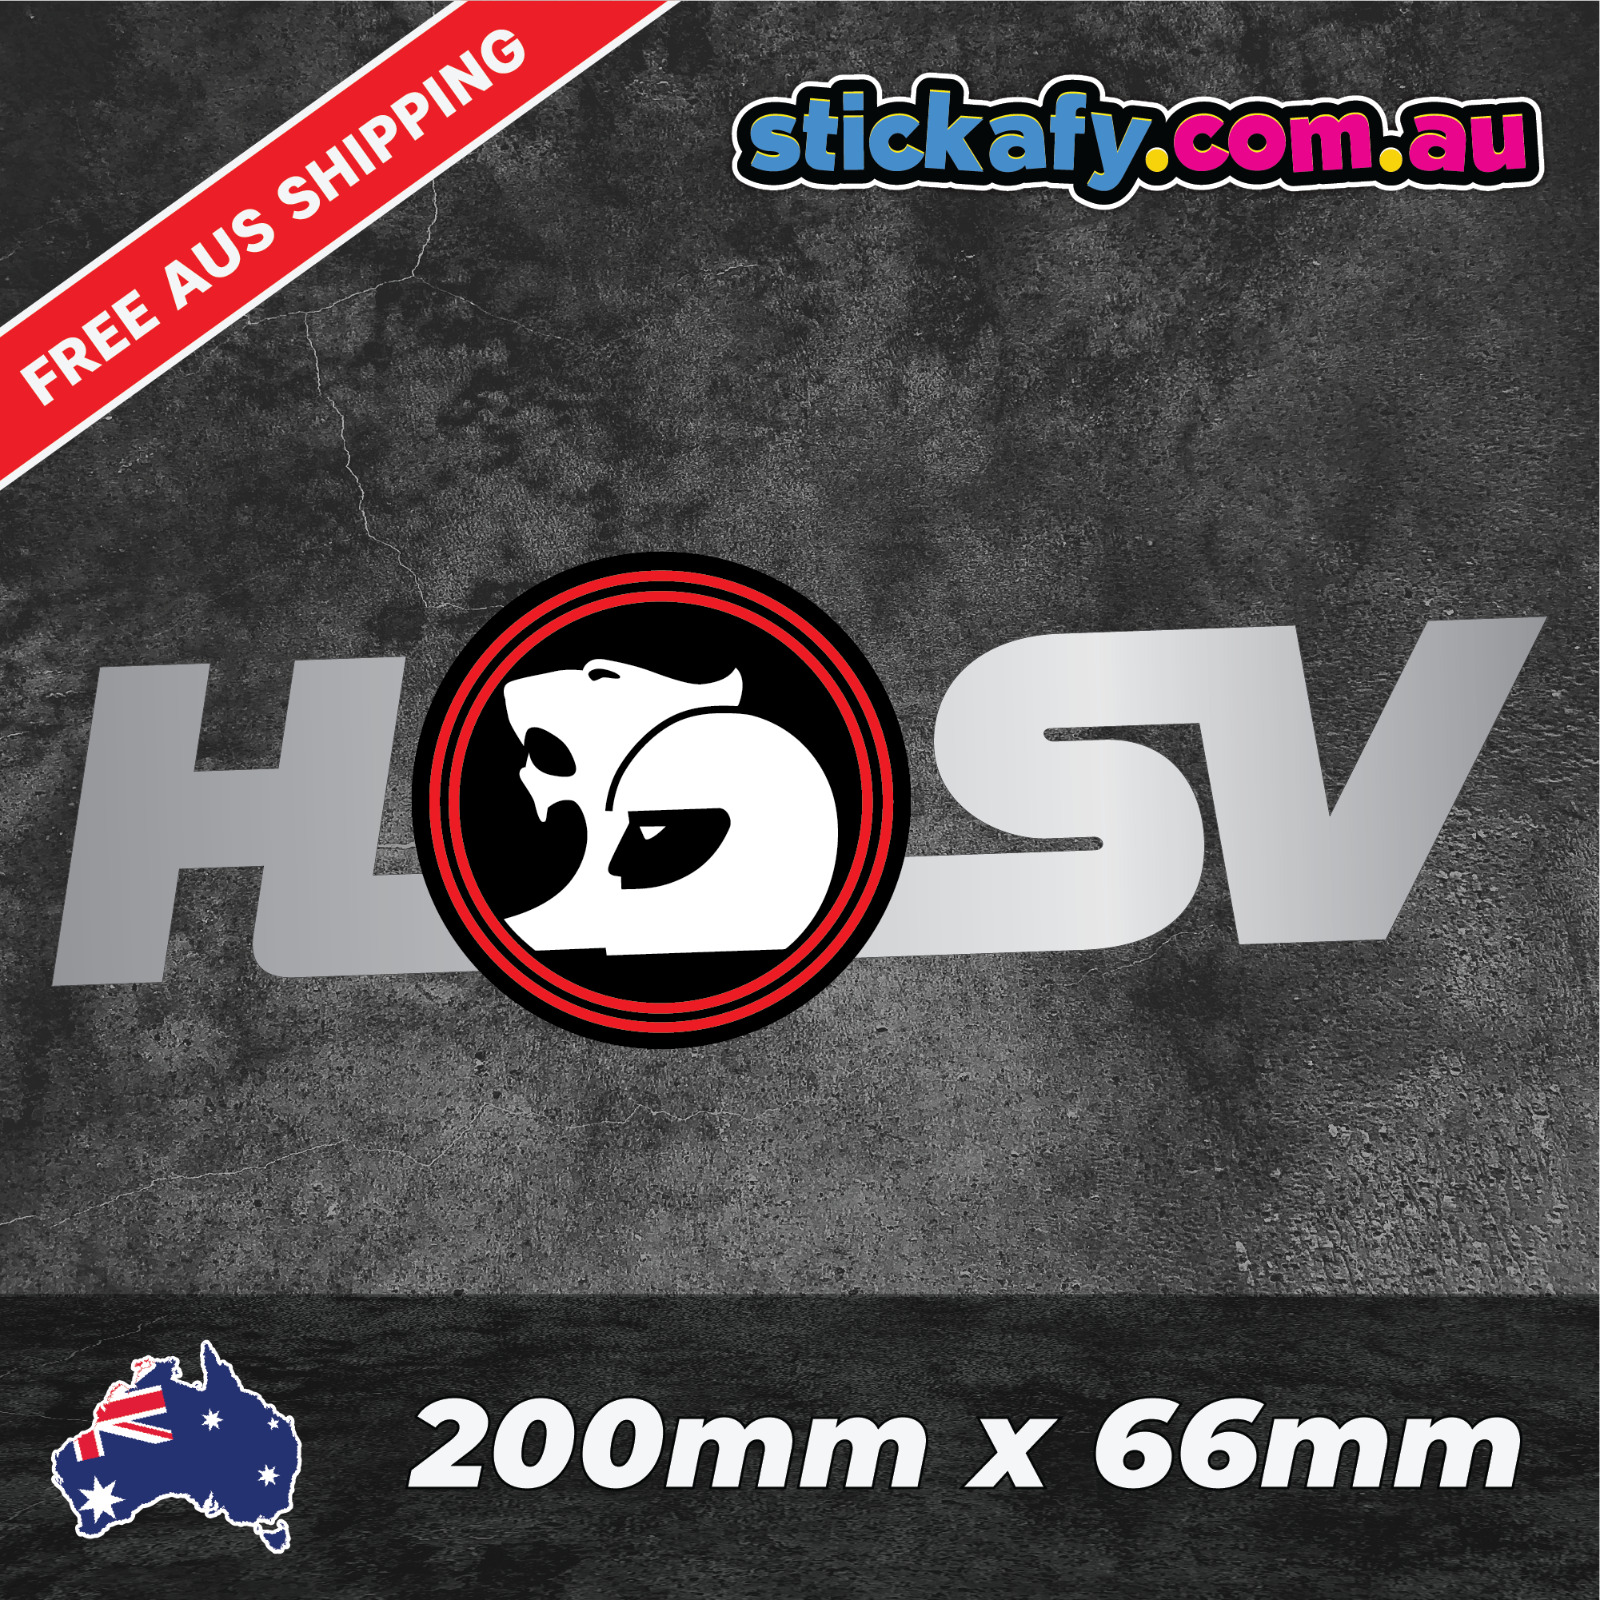 HSV Sticker Funny Laptop Car Window Bumper 4x4 Holden Special Vehicle Decal